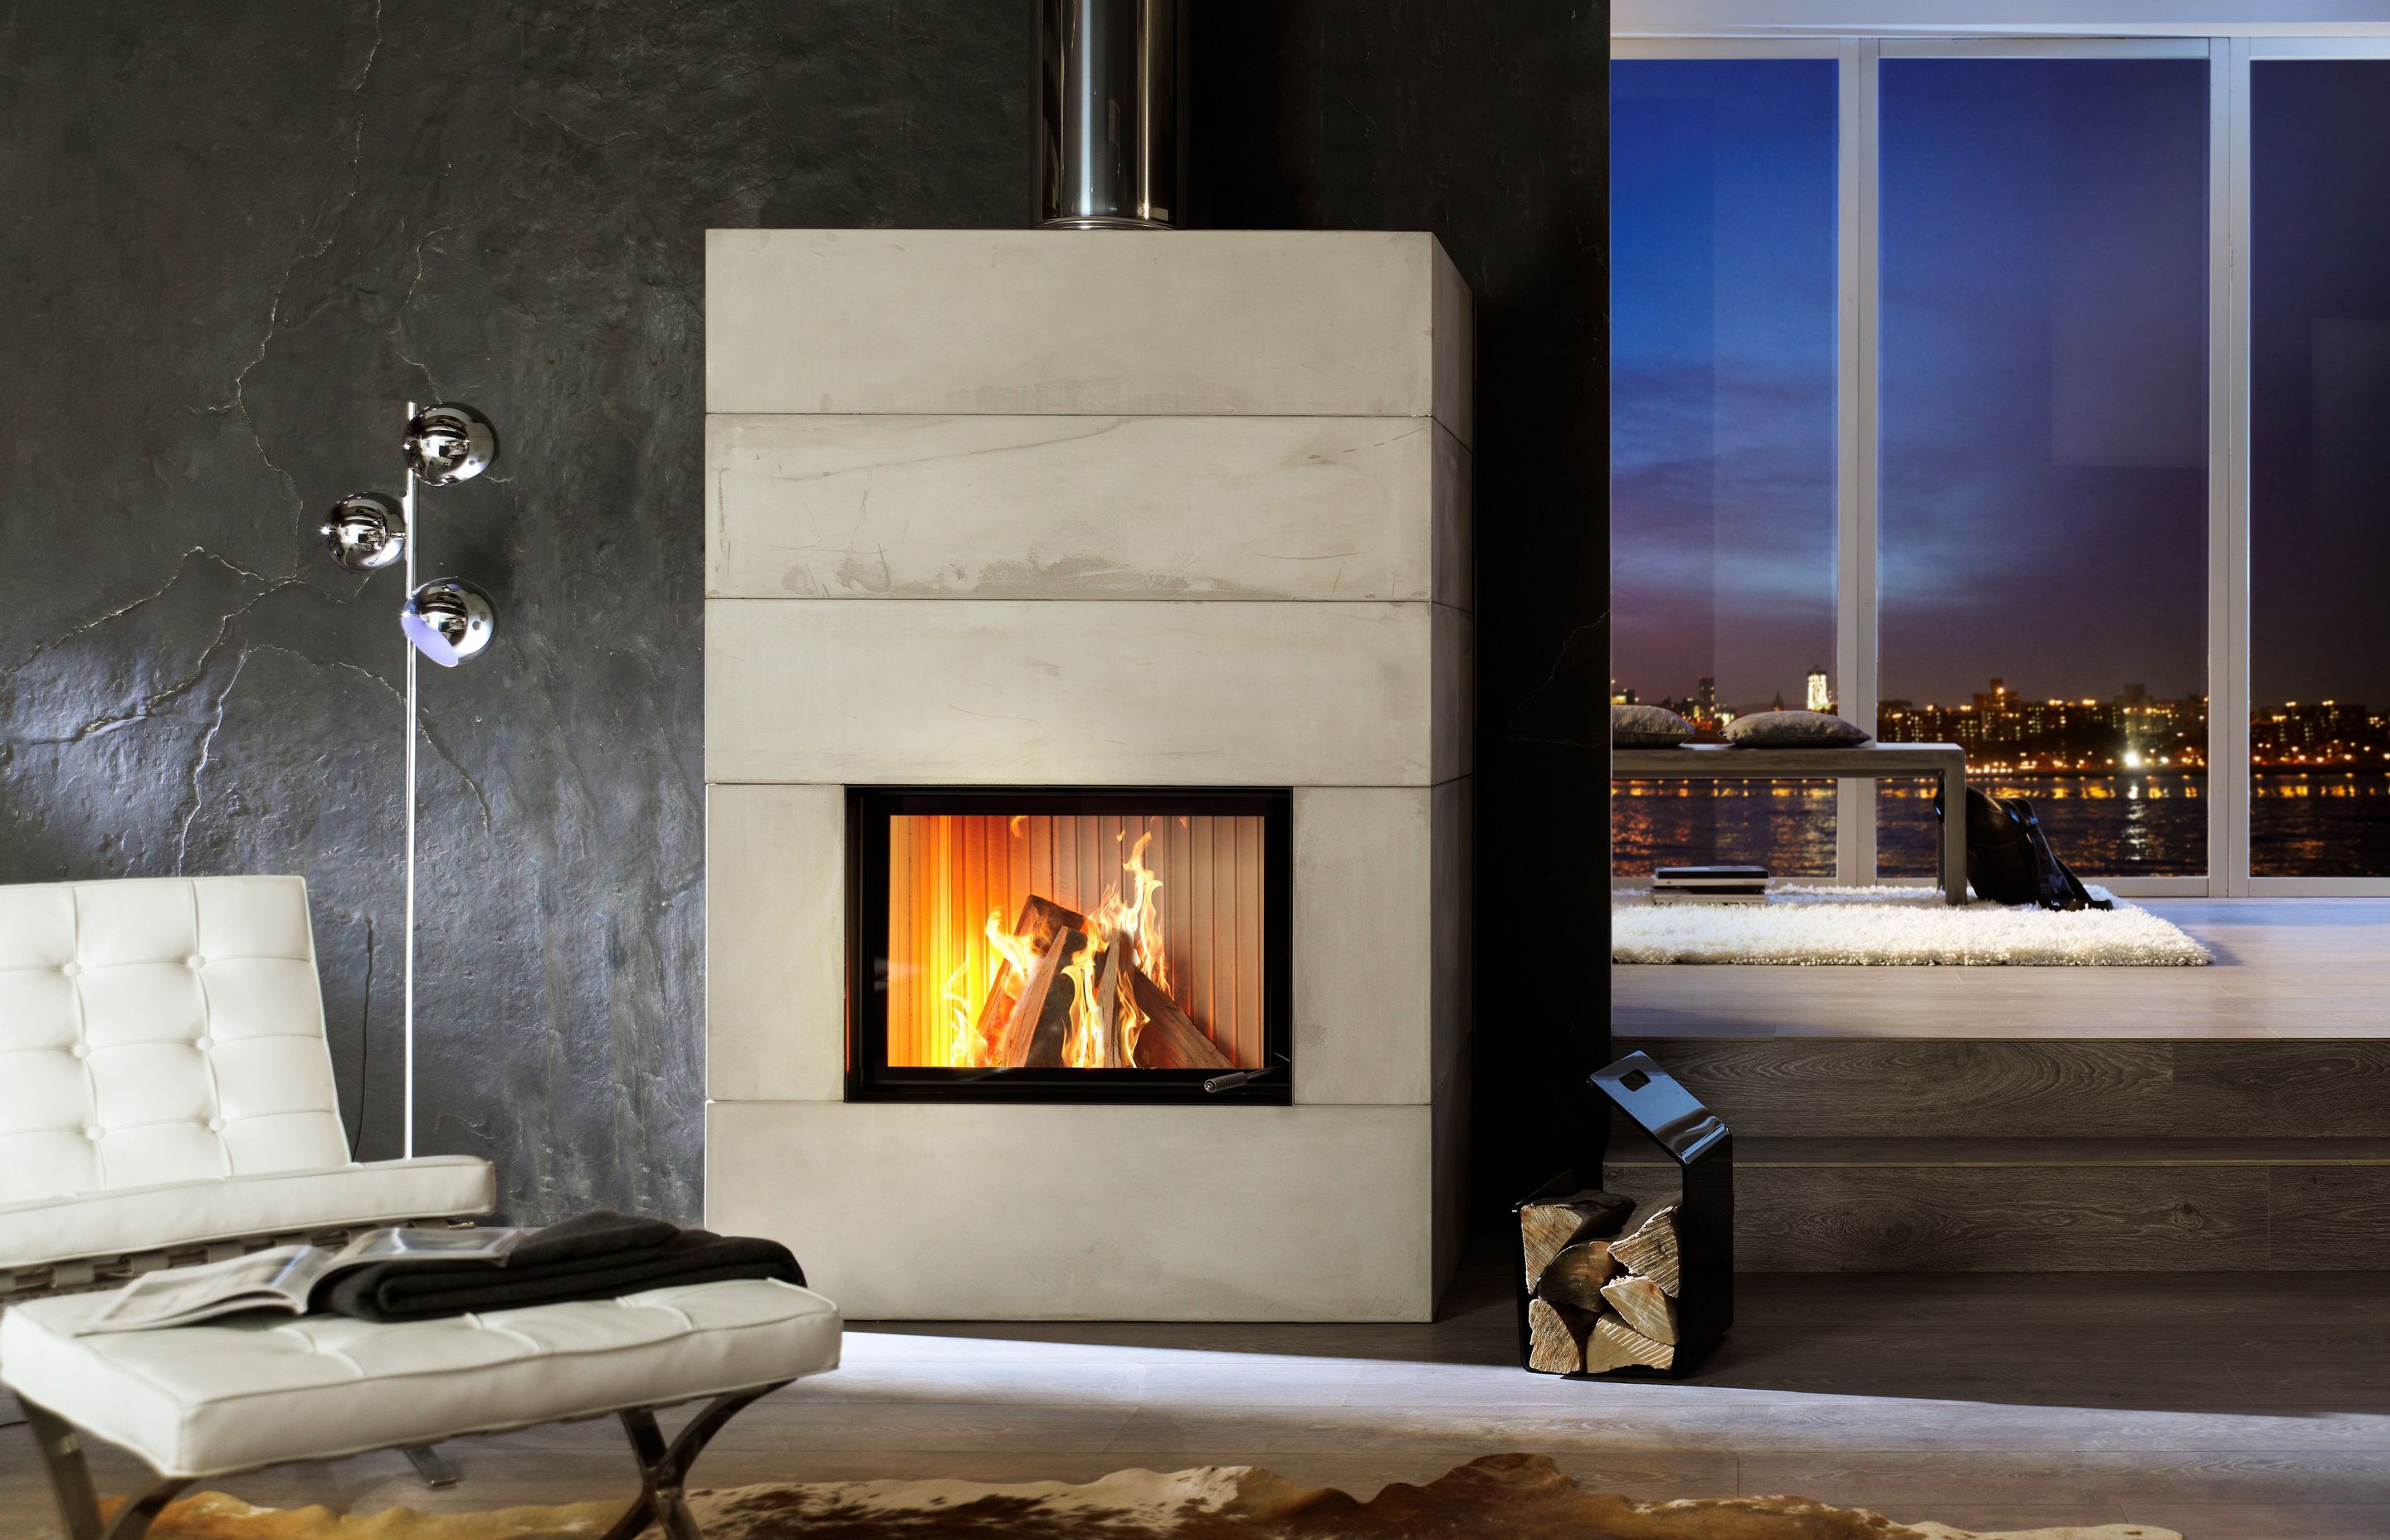 Euro Fireplaces offers a range of contemporary designs that celebrate the beauty of wood-burning fireplaces.